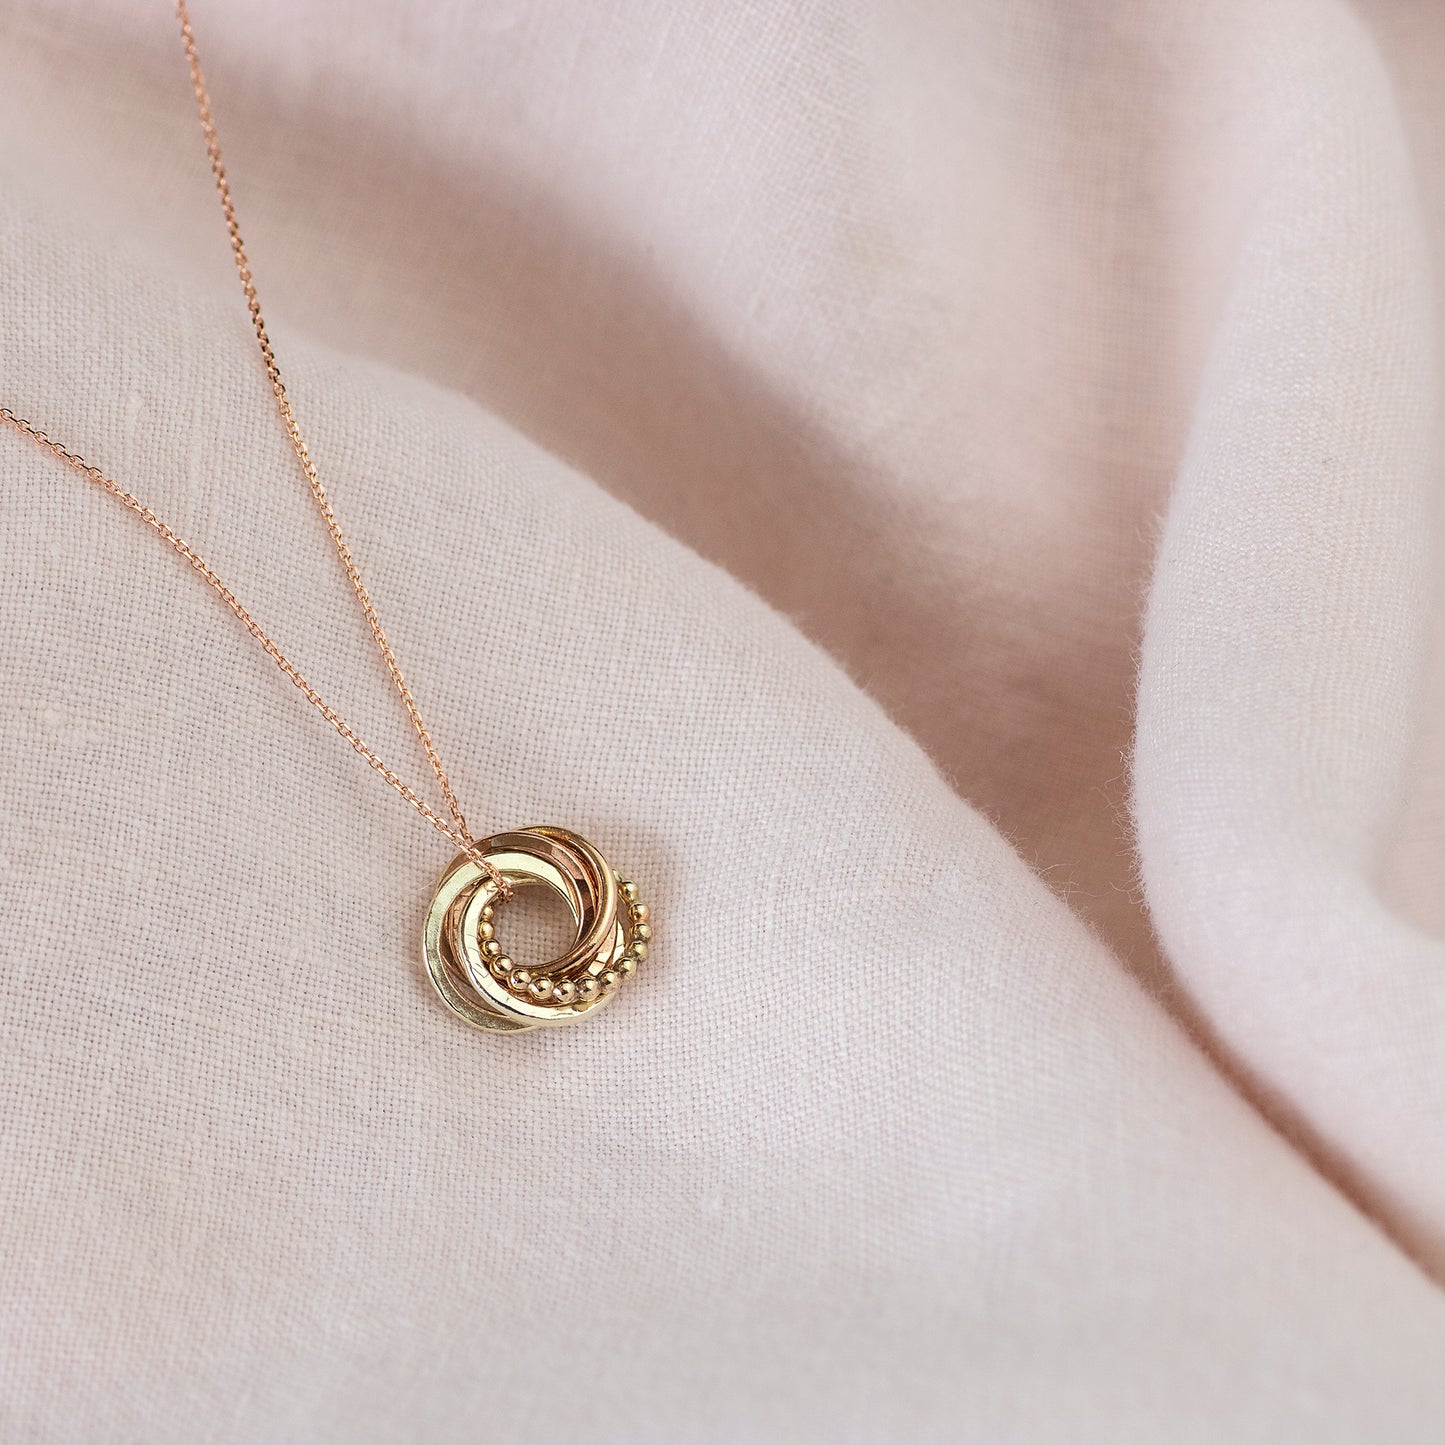 Tiny 9kt Gold 6th Anniversary Love Knot Necklace - Recycled White Gold - Rose Gold - Yellow Gold